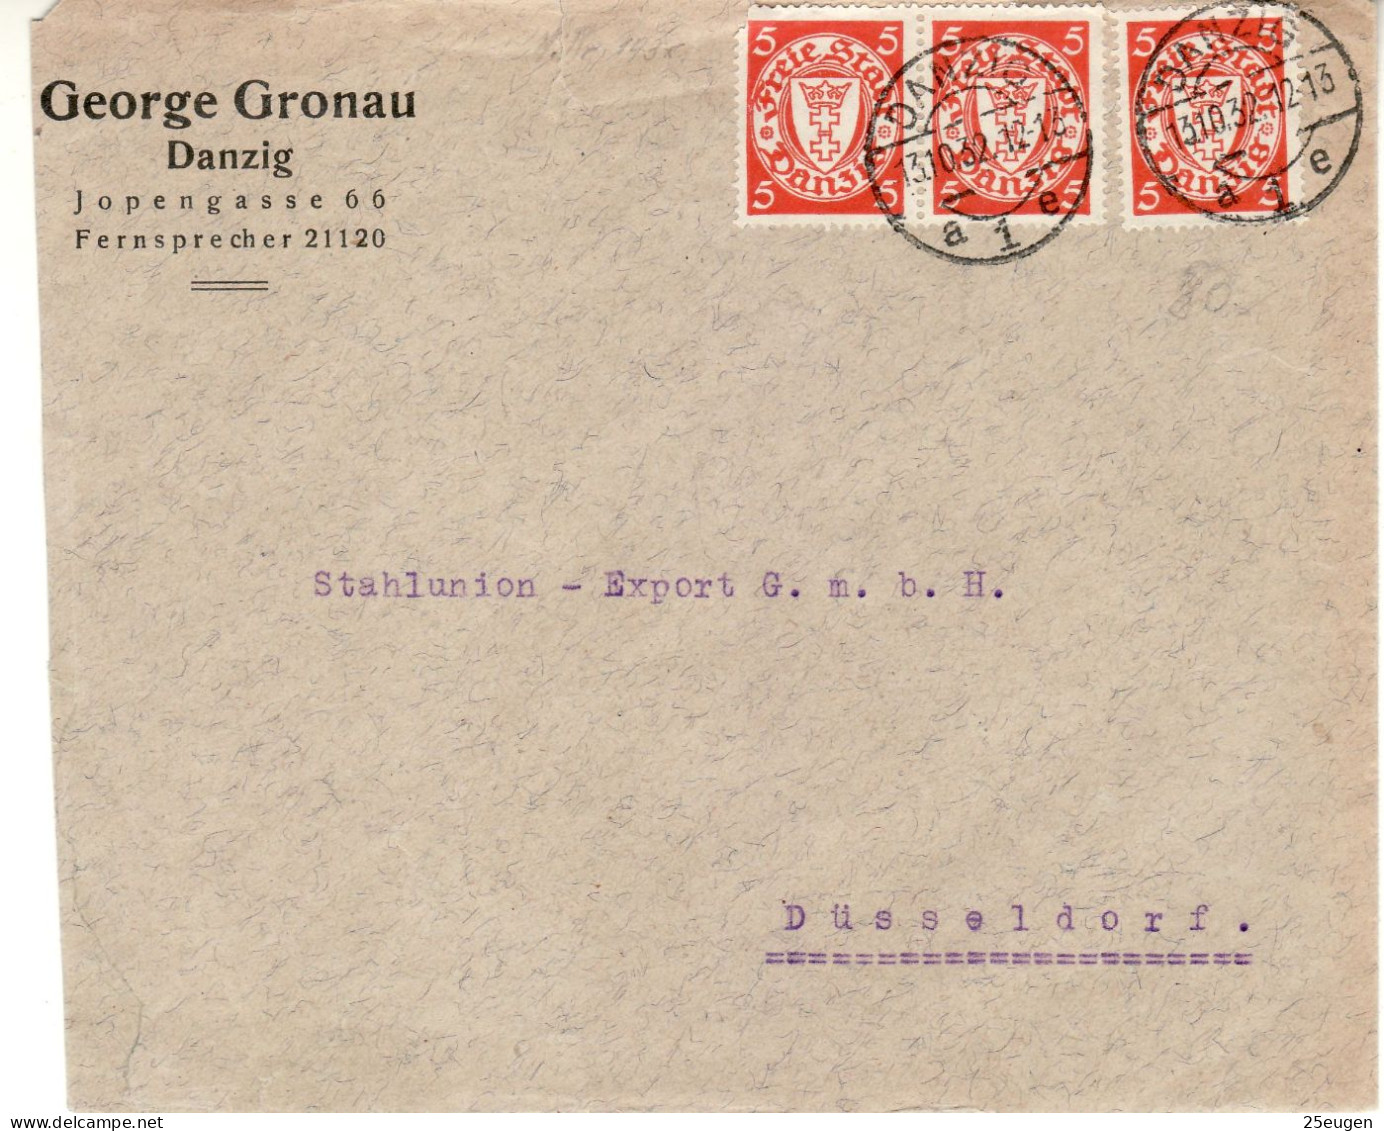 DANZIG 1932  LETTER SENT FROM DANZIG TO DUESSELDORF - Storia Postale